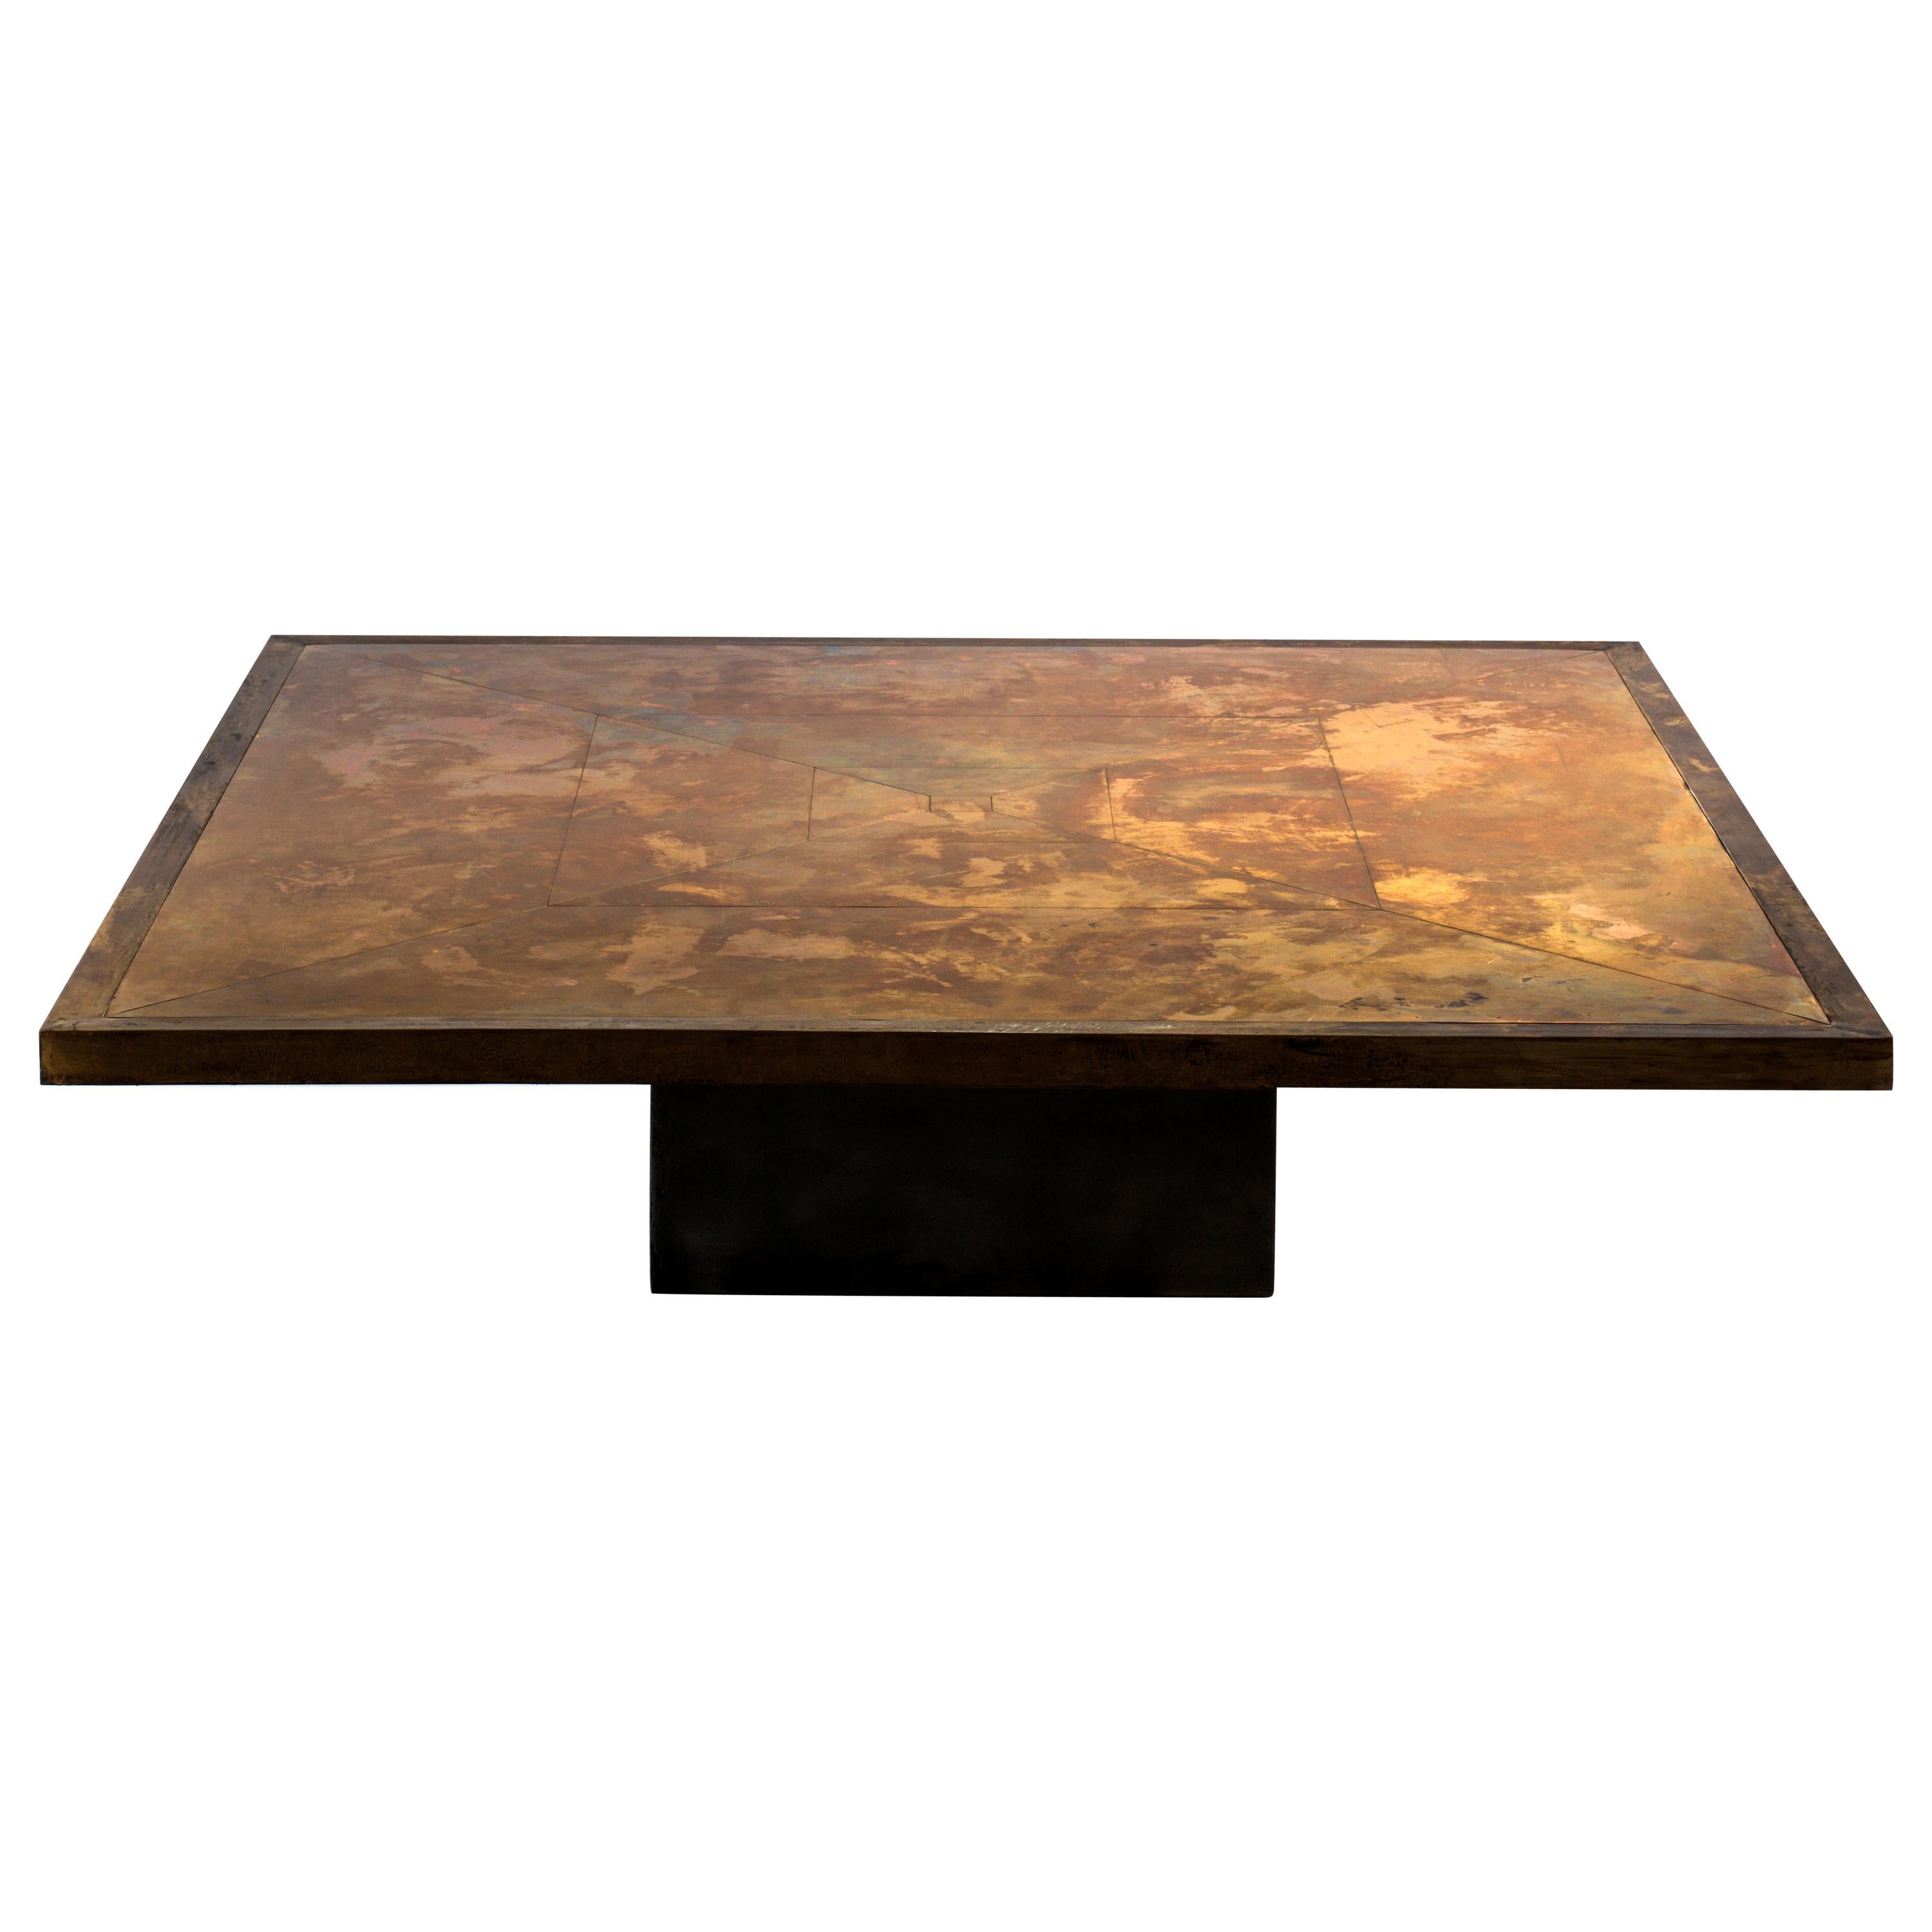 21st Century Coffee Table Bronze Marbled Top, Plinth Base in Steel